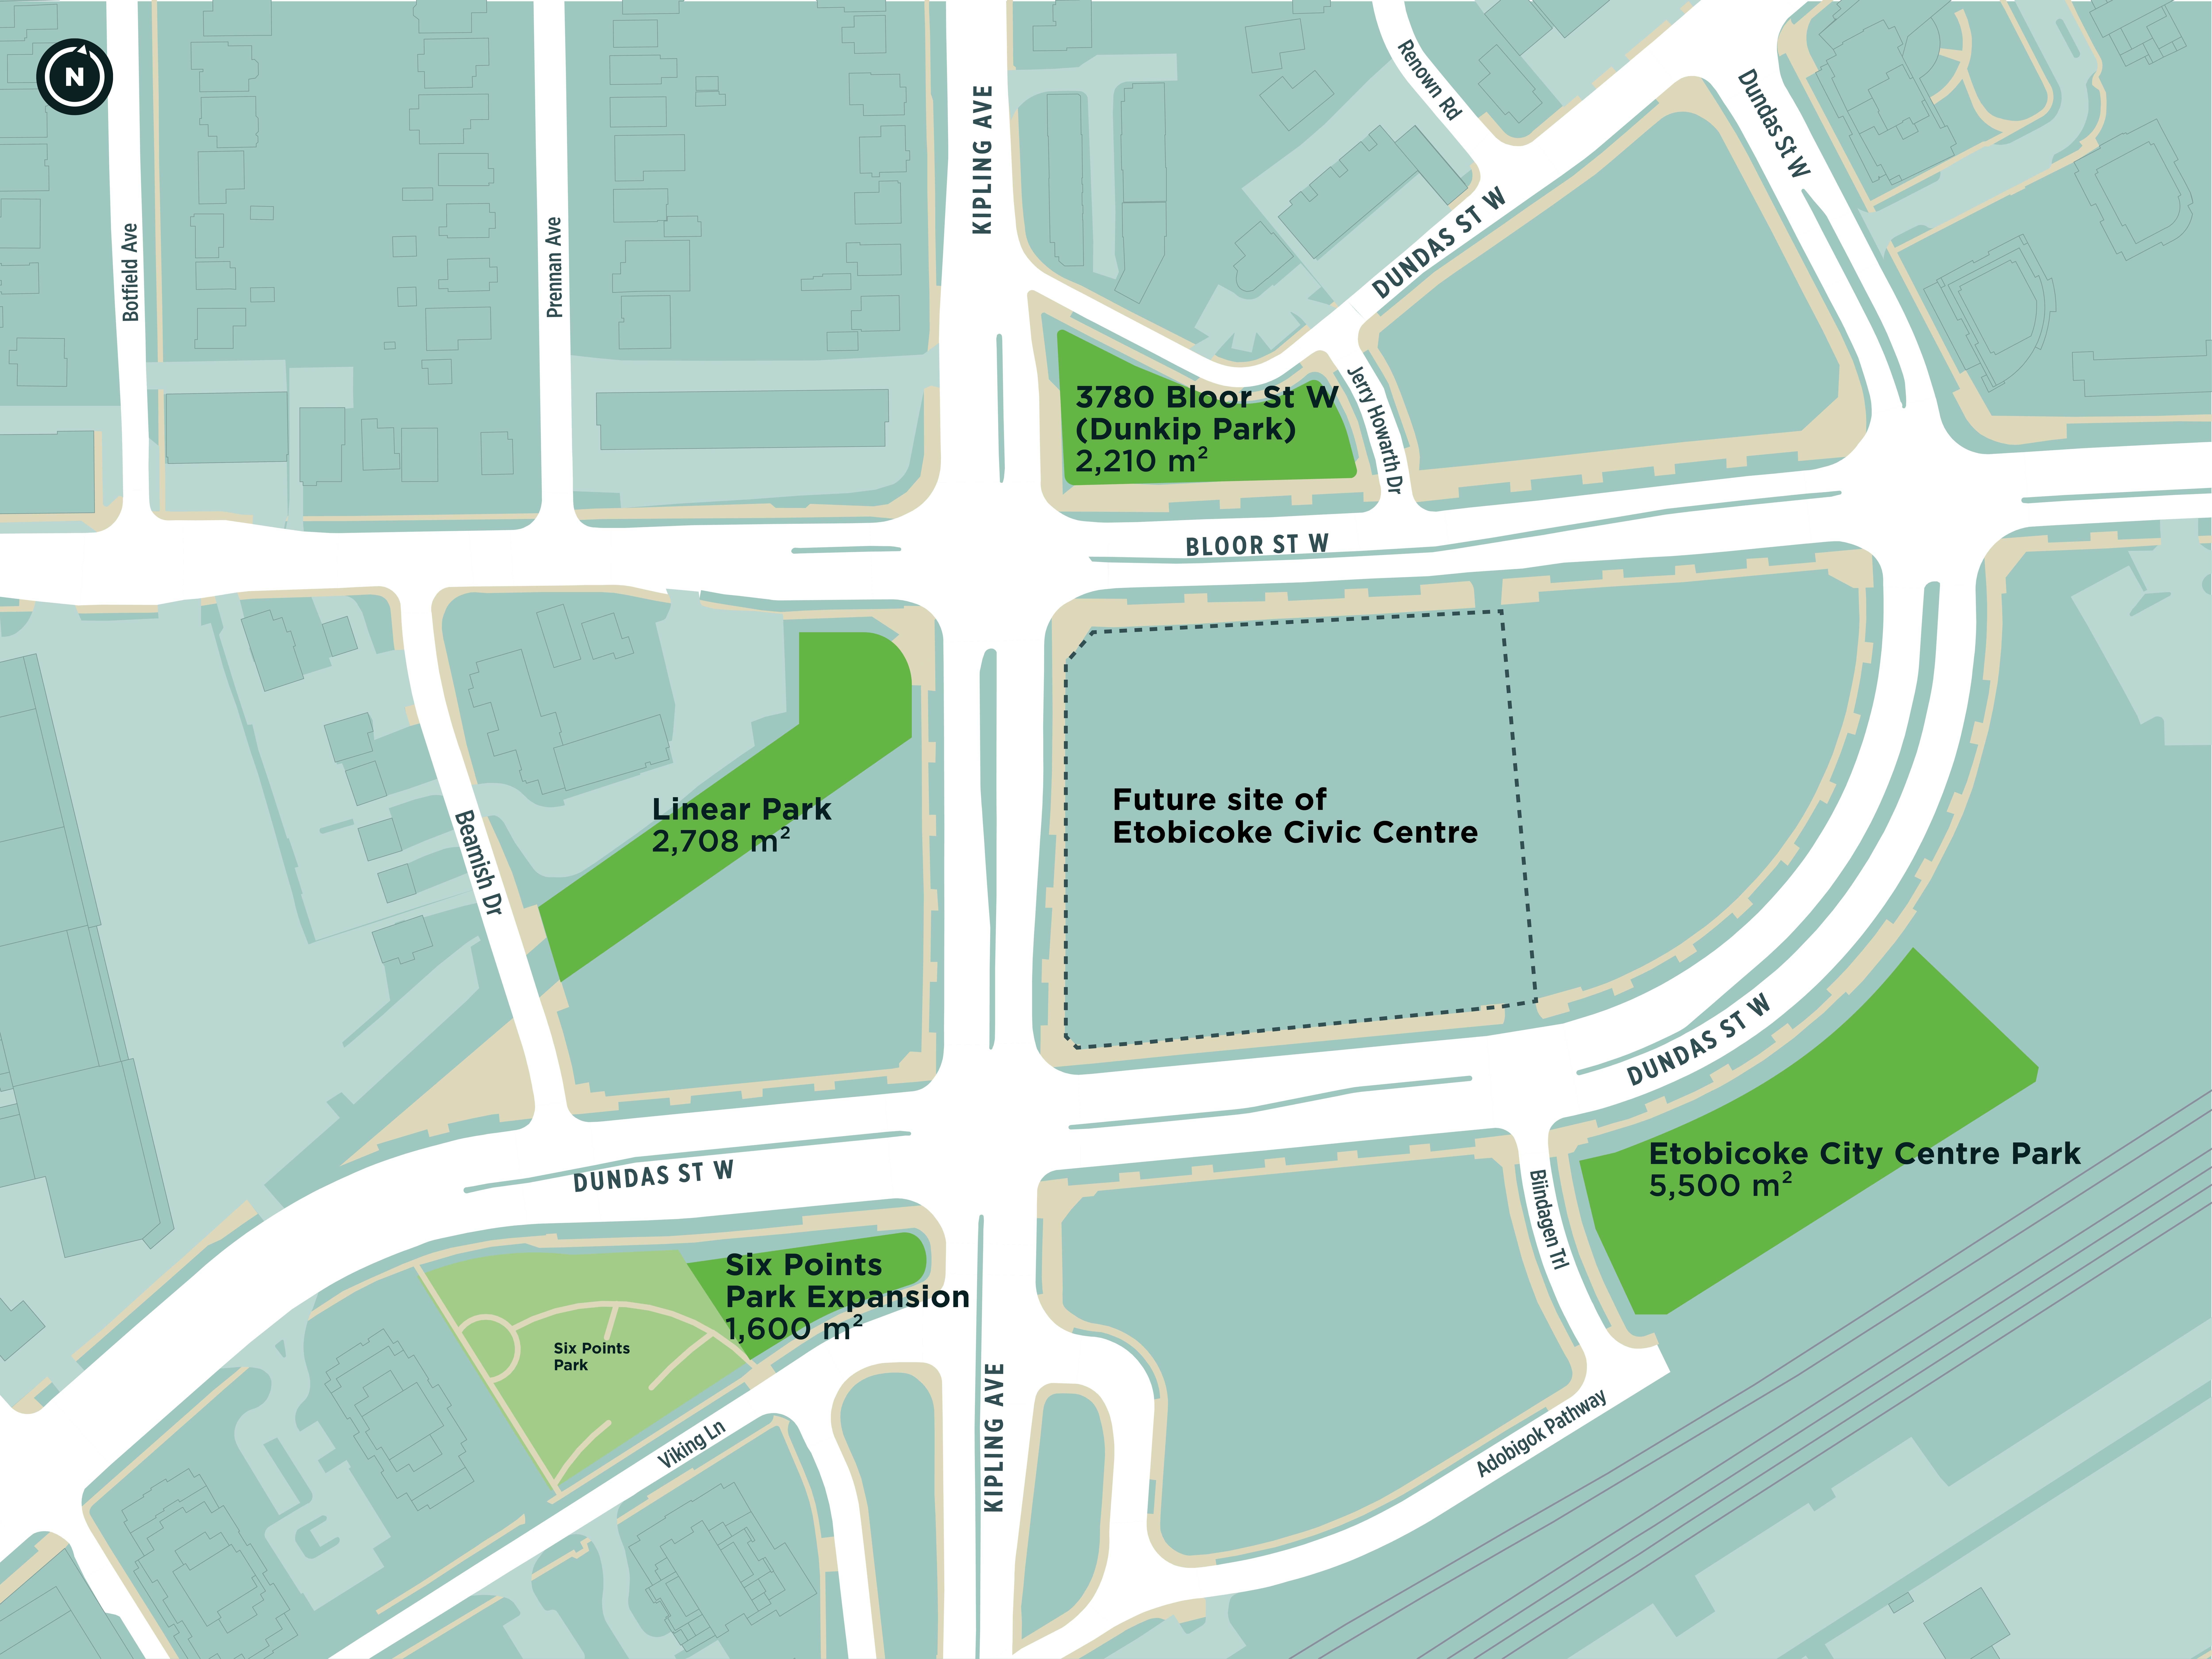 A map of the Six Points neighbourhood showing the location of the four future parks with the future site of the Etobicoke Civic Centre in the centre, at Kipling Avenue and Dundas Street West. West of Kipling Avenue is Six Points Park Expansion of 1,600 m2, located between Dundas Street West and Viking Lane, and Linear Park at 2,708 m2, located between Bloor Street West and Dundas Street West, connecting to Beamish Drive. East of Kipling Avenue is Etobicoke Centre Park at 5,500 m2, located at Dundas Street West and Biindgagen Trail, and Dunkip Park at 2,210 m2 located just north of Bloor Street West. 